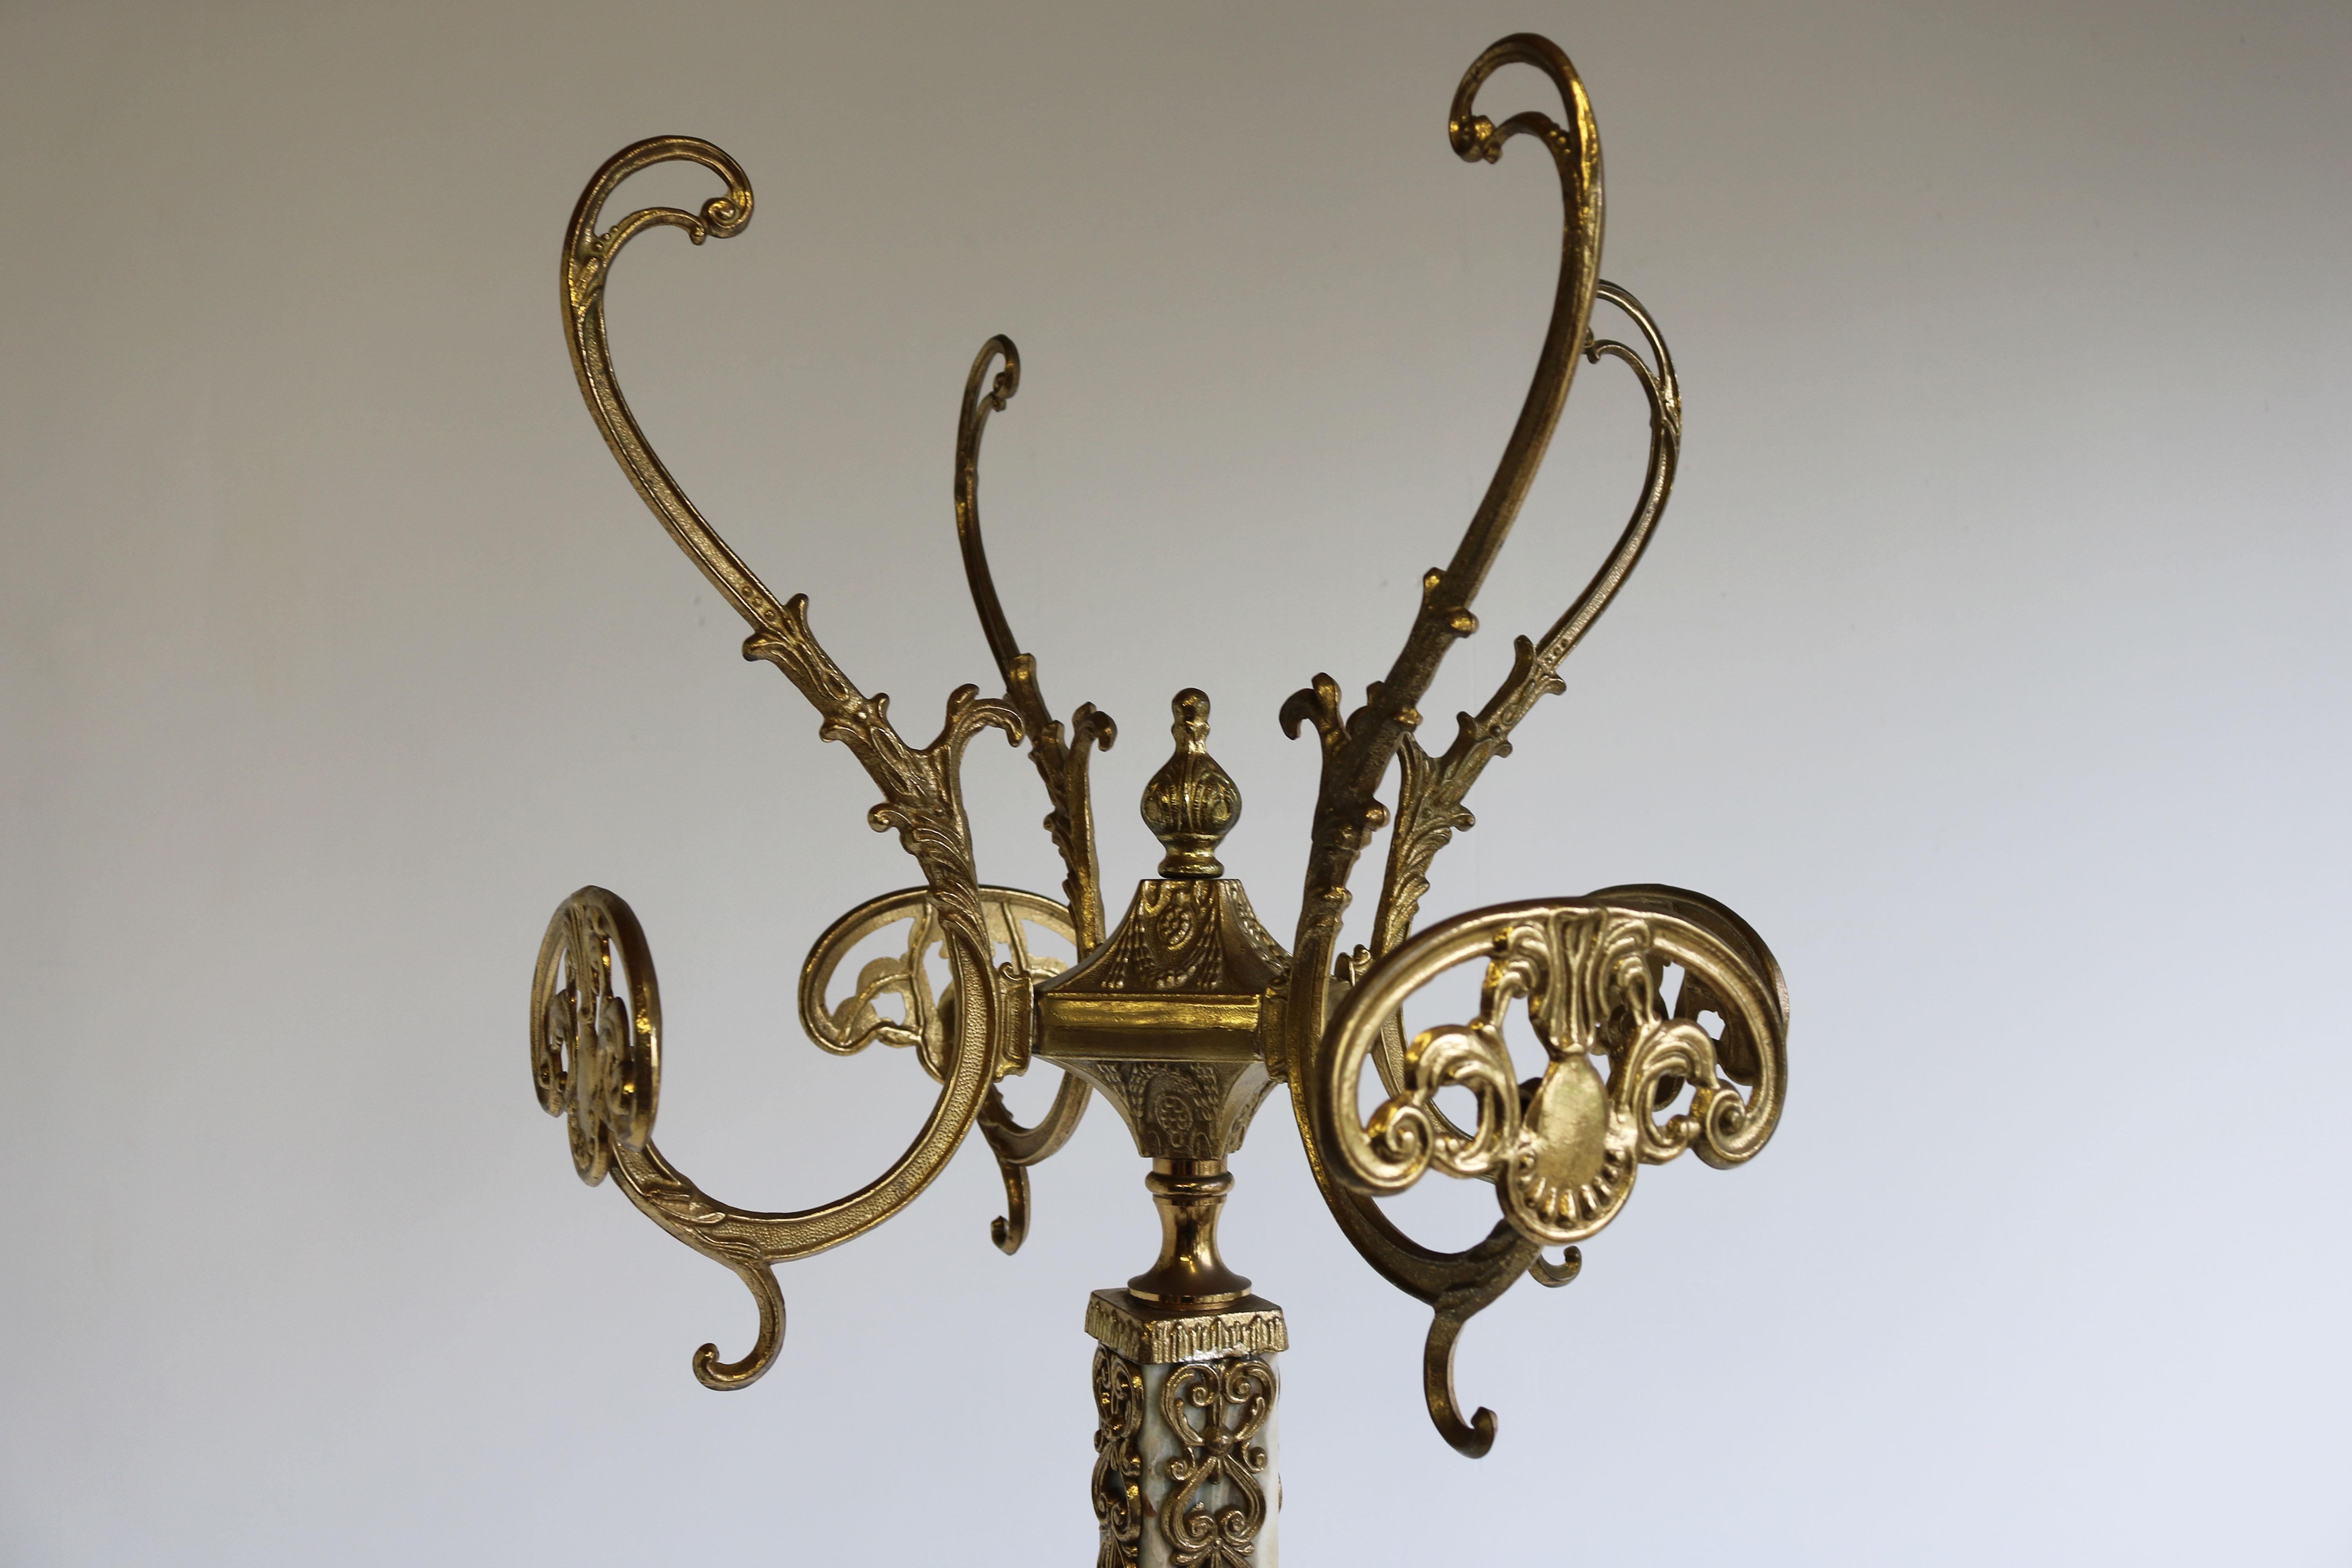 Impressive & practical! This marvelous Italian ornate brass coat rack with base decorated Brass details and Onyx marble. Marvelous mid-century design in classical / Hollywood regency style.
Very nice sturdy quality with amazing details as the